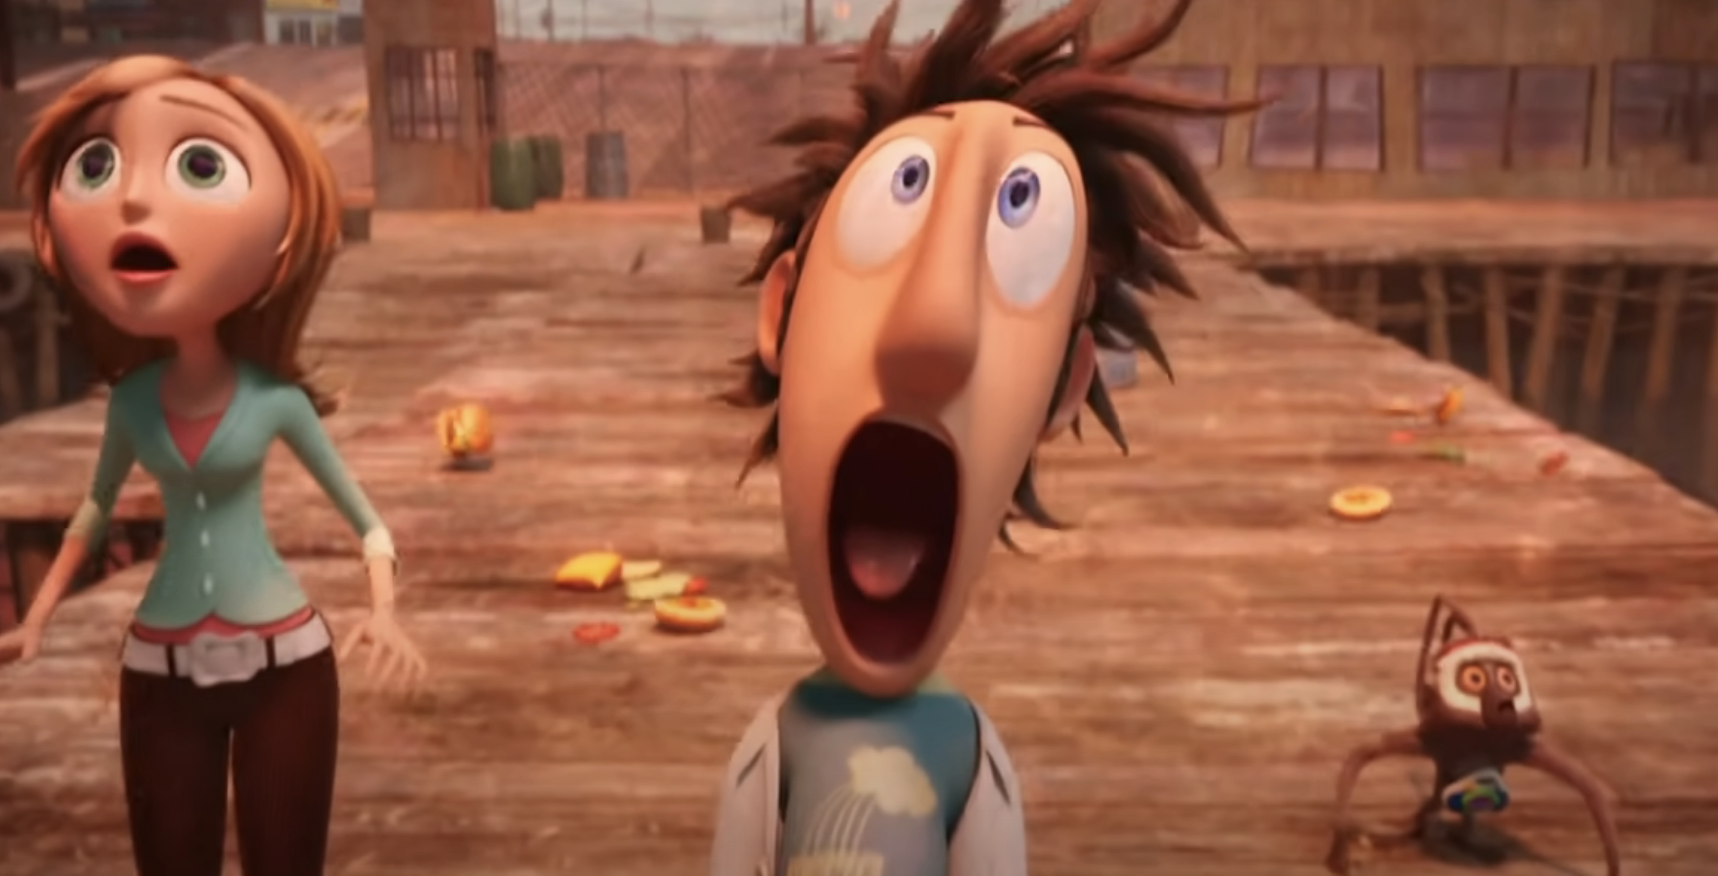 Animated characters shocked on a dock, with scattered objects around